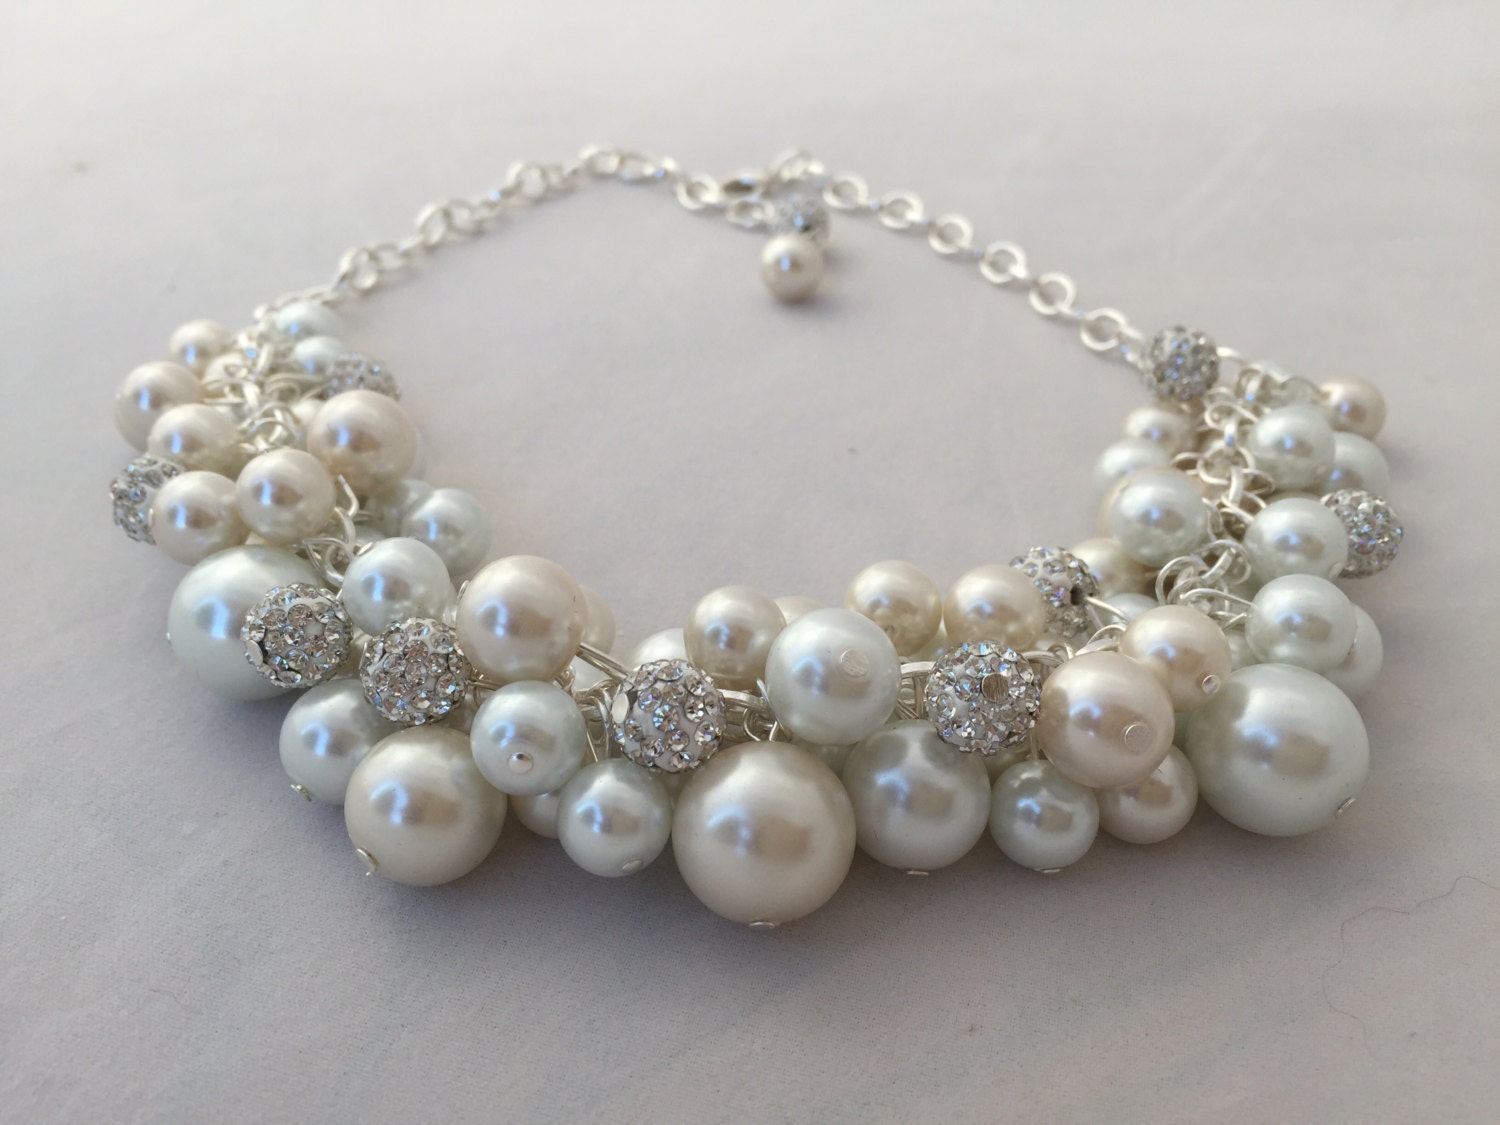 Ivory and white statement necklace with crystal spacer beads- bridesmaid jewelry